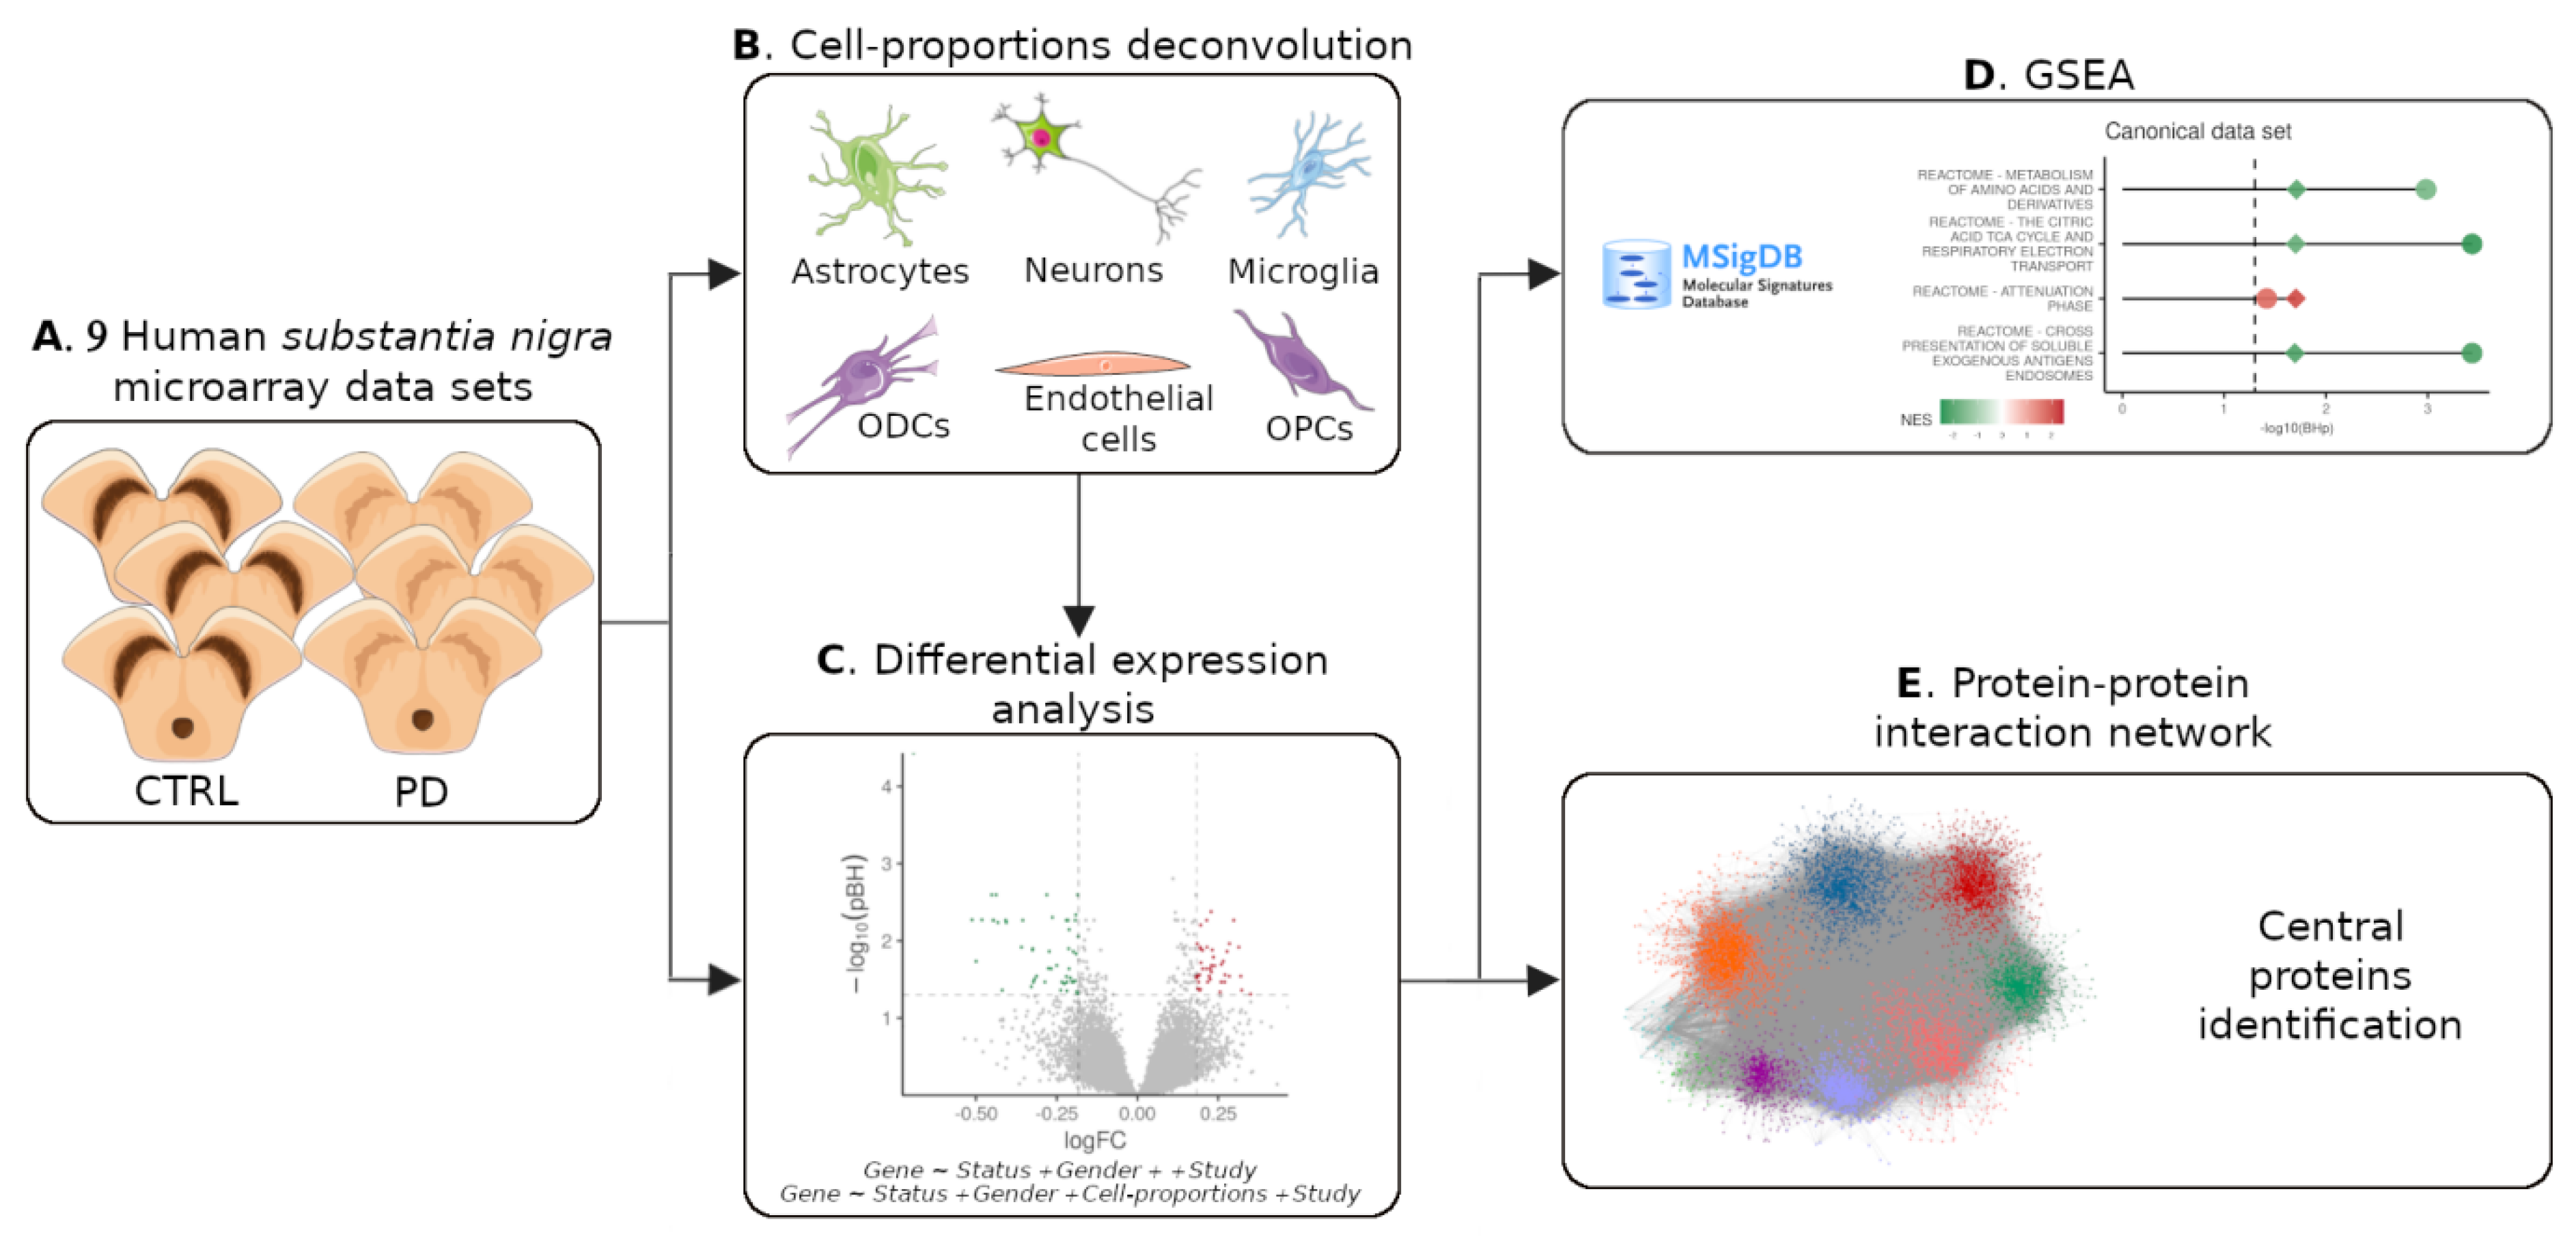 Cells | Free Full-Text | Correcting Differential Gene Expression Analysis  for Cyto&mdash;Architectural Alterations in Substantia Nigra of  Parkinson&rsquo;s Disease Patients Reveals Known and Potential Novel  Disease&mdash;Associated Genes and Pathways ...